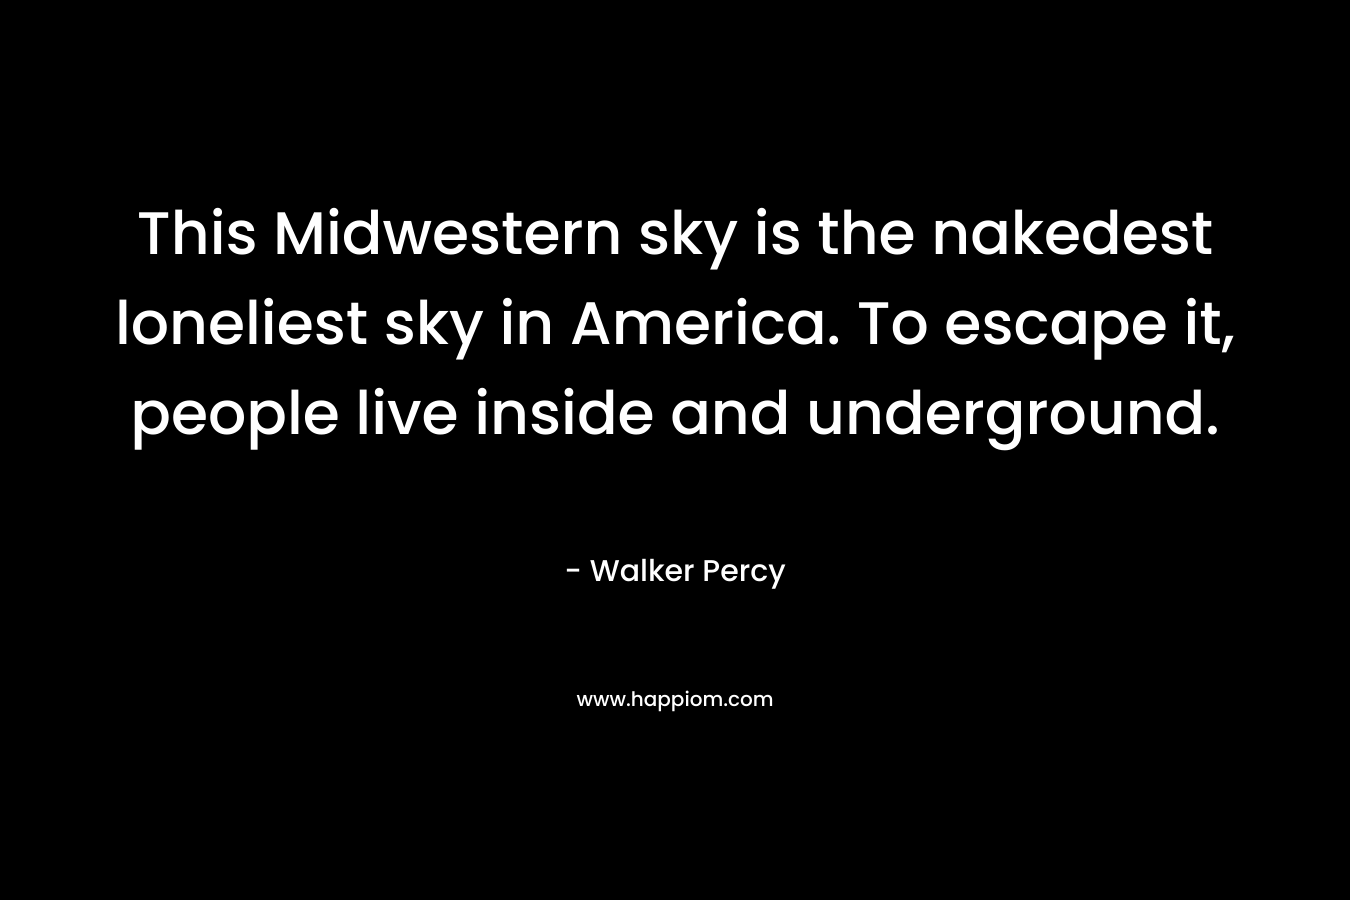 This Midwestern sky is the nakedest loneliest sky in America. To escape it, people live inside and underground.